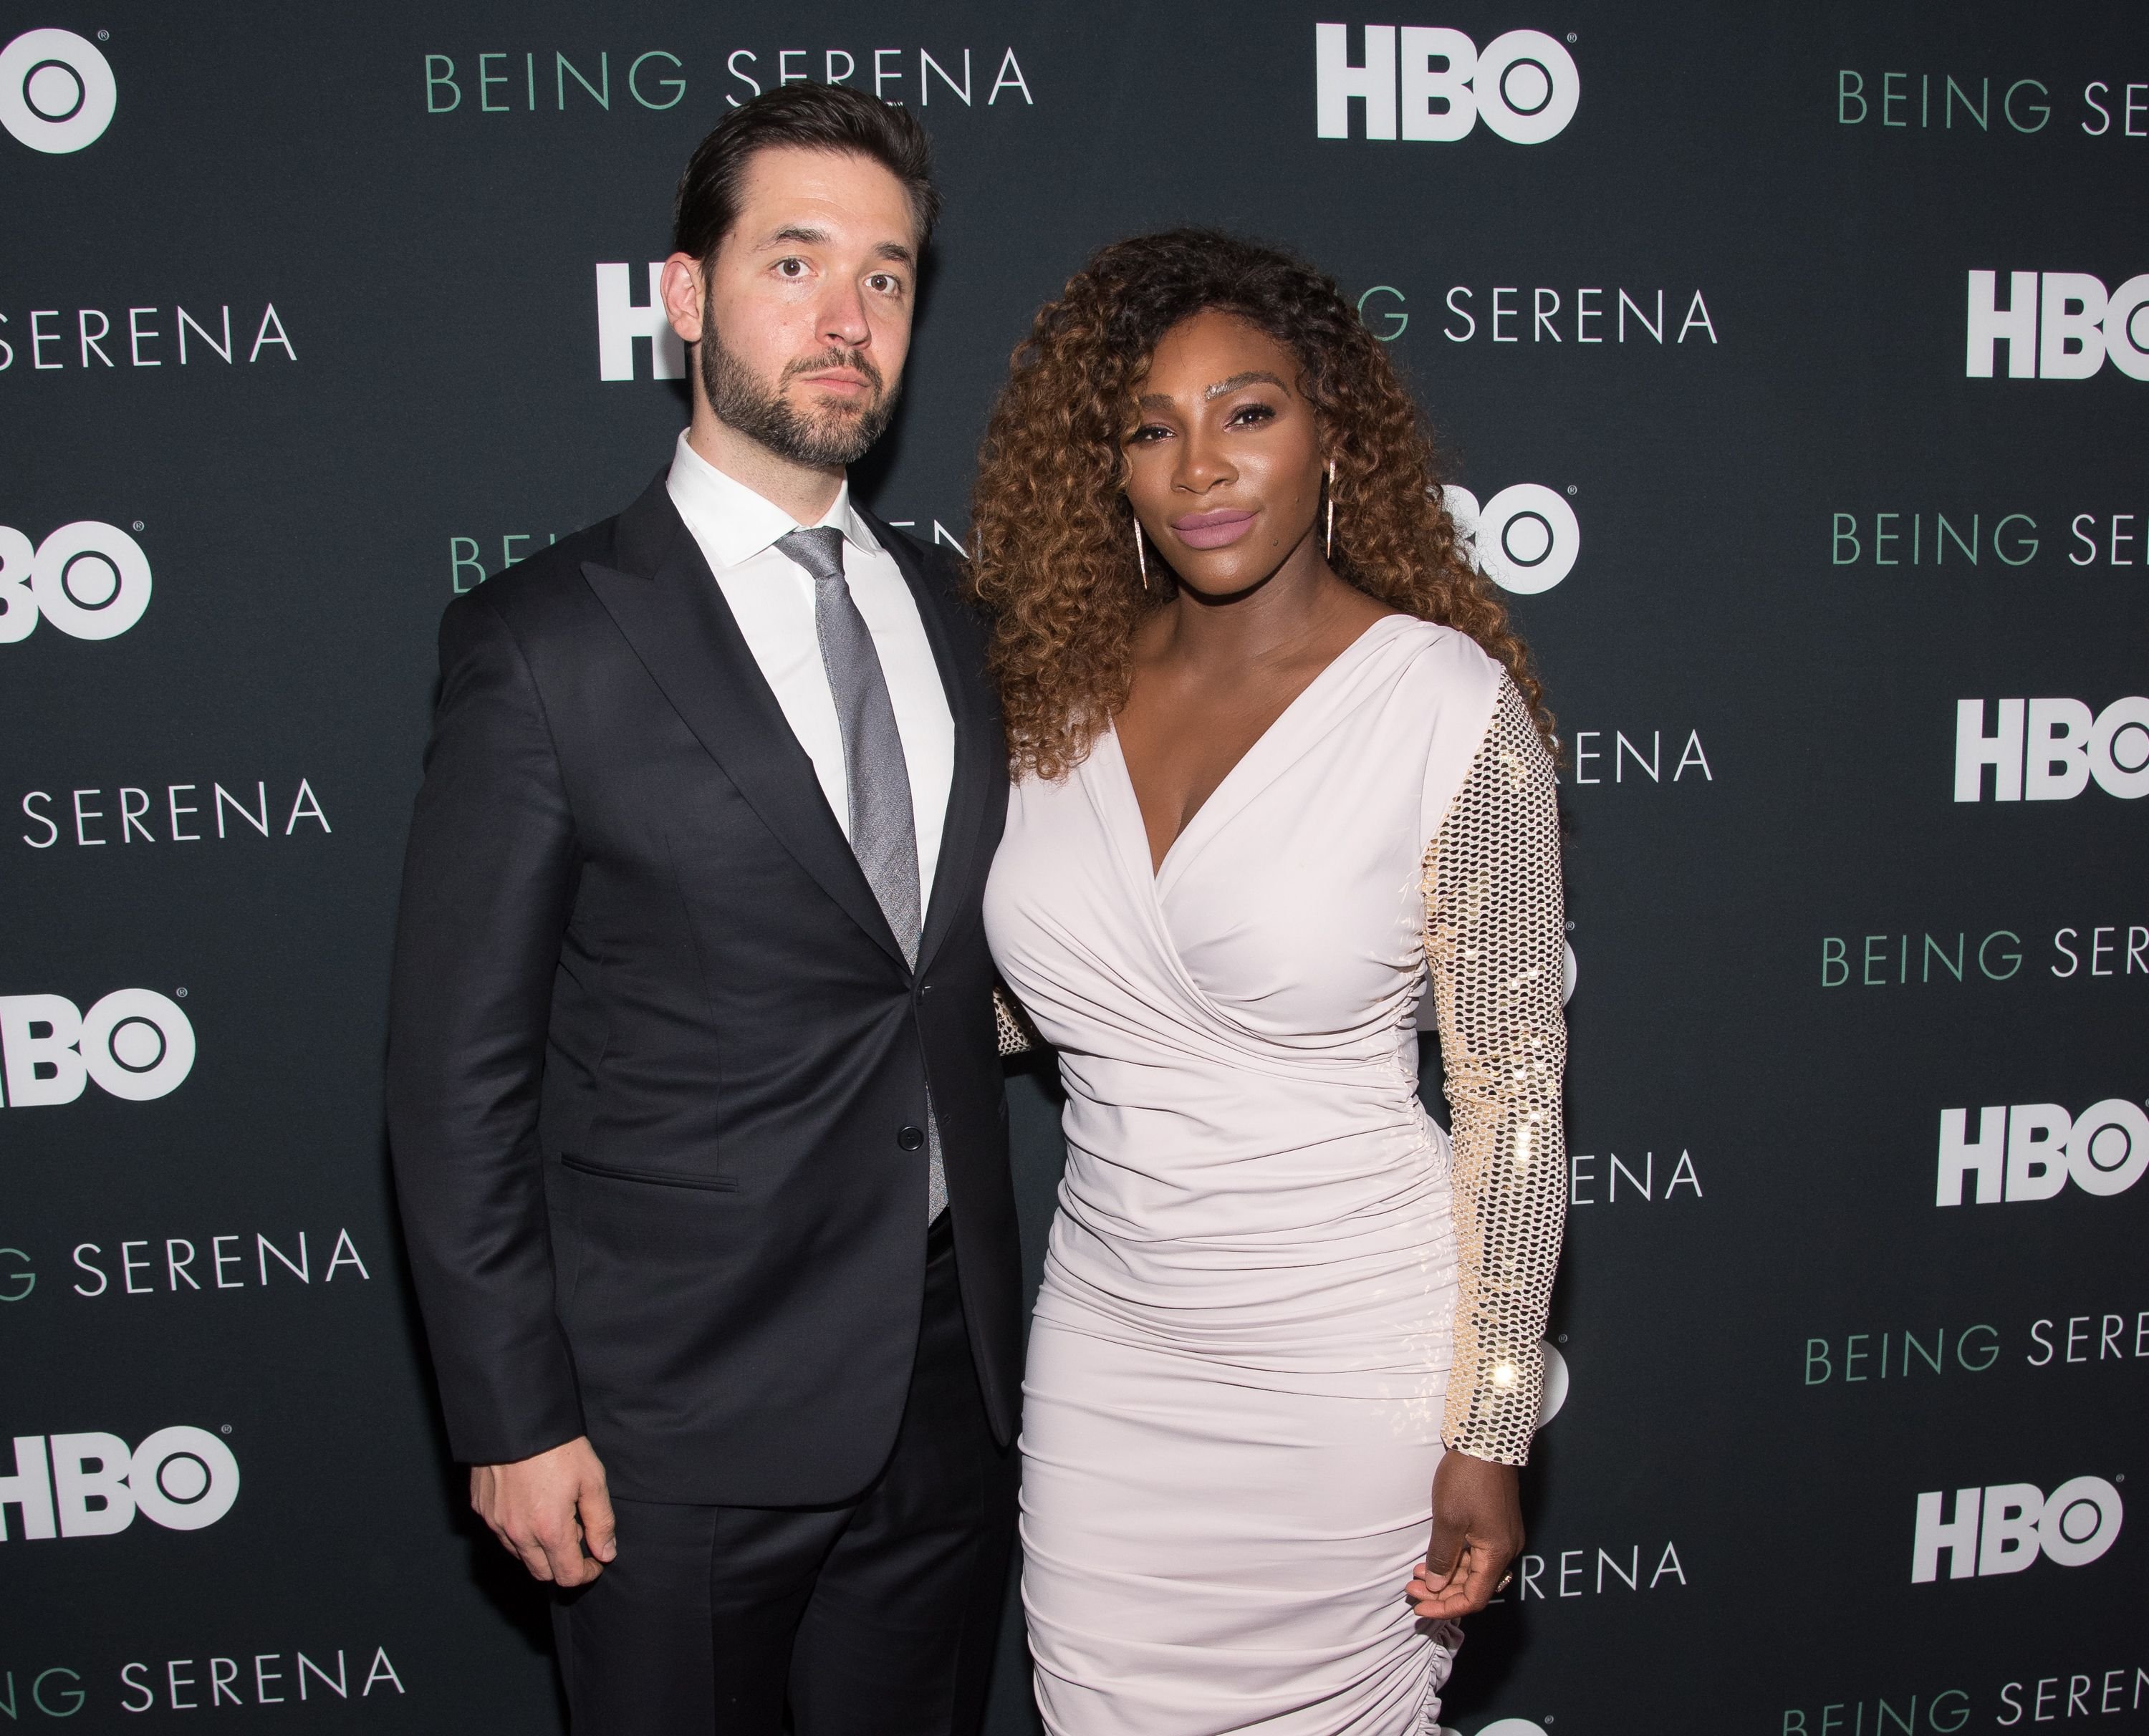 Serena Williams and husband Alexis Ohanian at the "Being Serena" New York premiere at Time Warner Center on April 25, 2018 | Photo: Getty Images